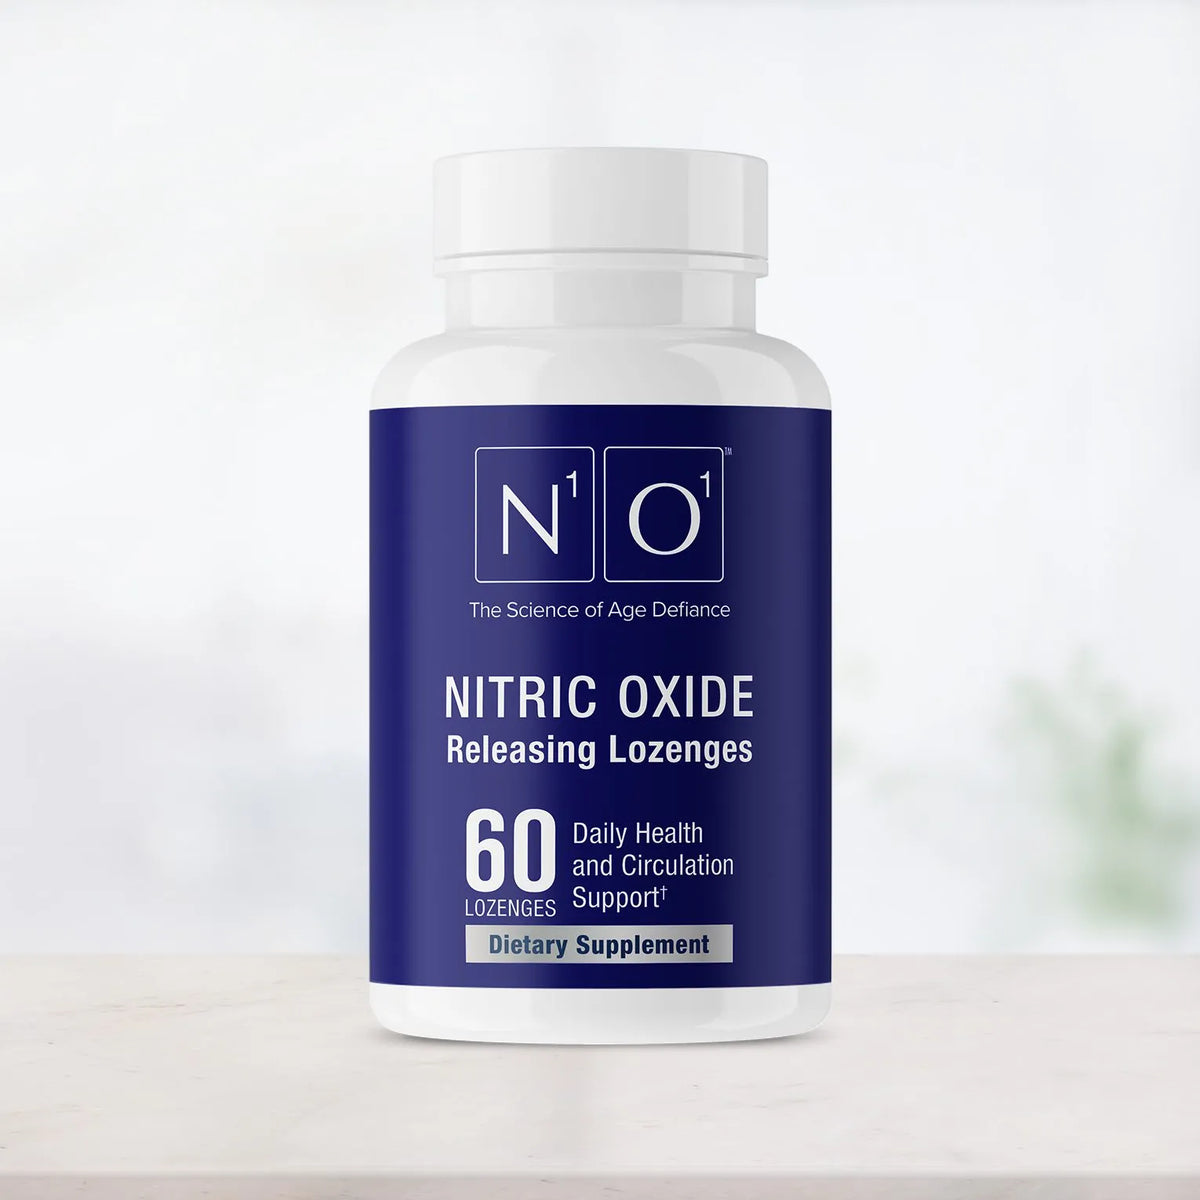 N1O1 Nitric Oxide Lozenges, 60 Lozenges (30 day supply 